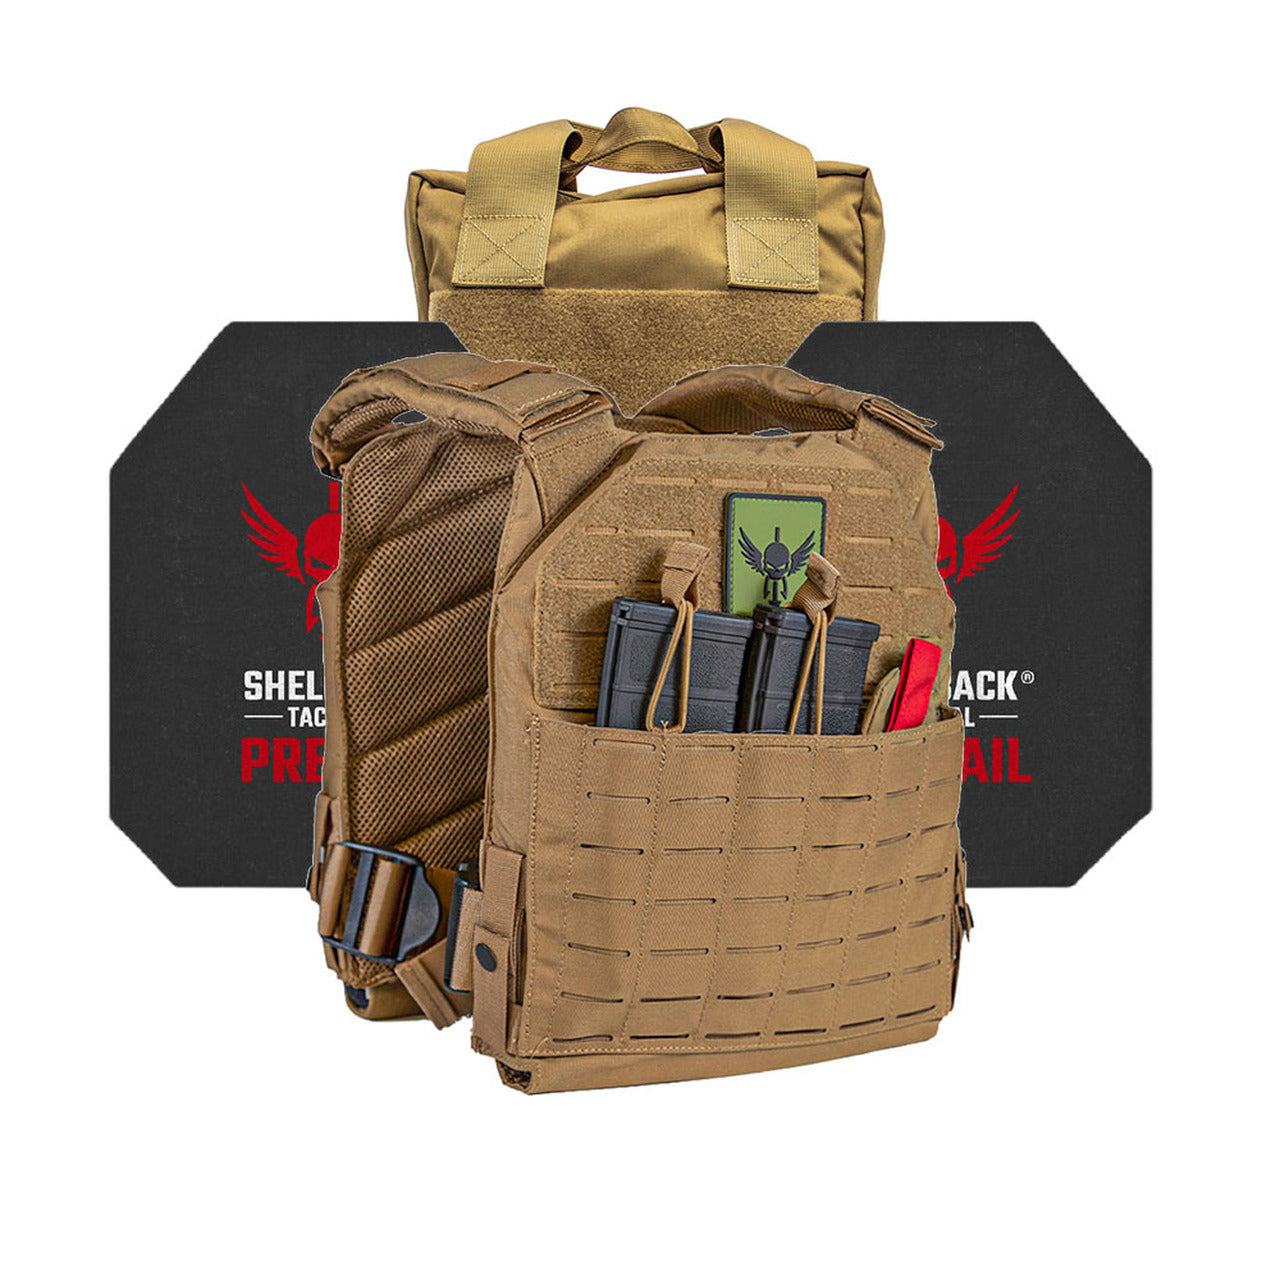 A Shellback Tactical Defender 2.0 Active Shooter Armor Kit with Level IV Model 4S17 Armor Plates tactical vest with a holster and a grenade.